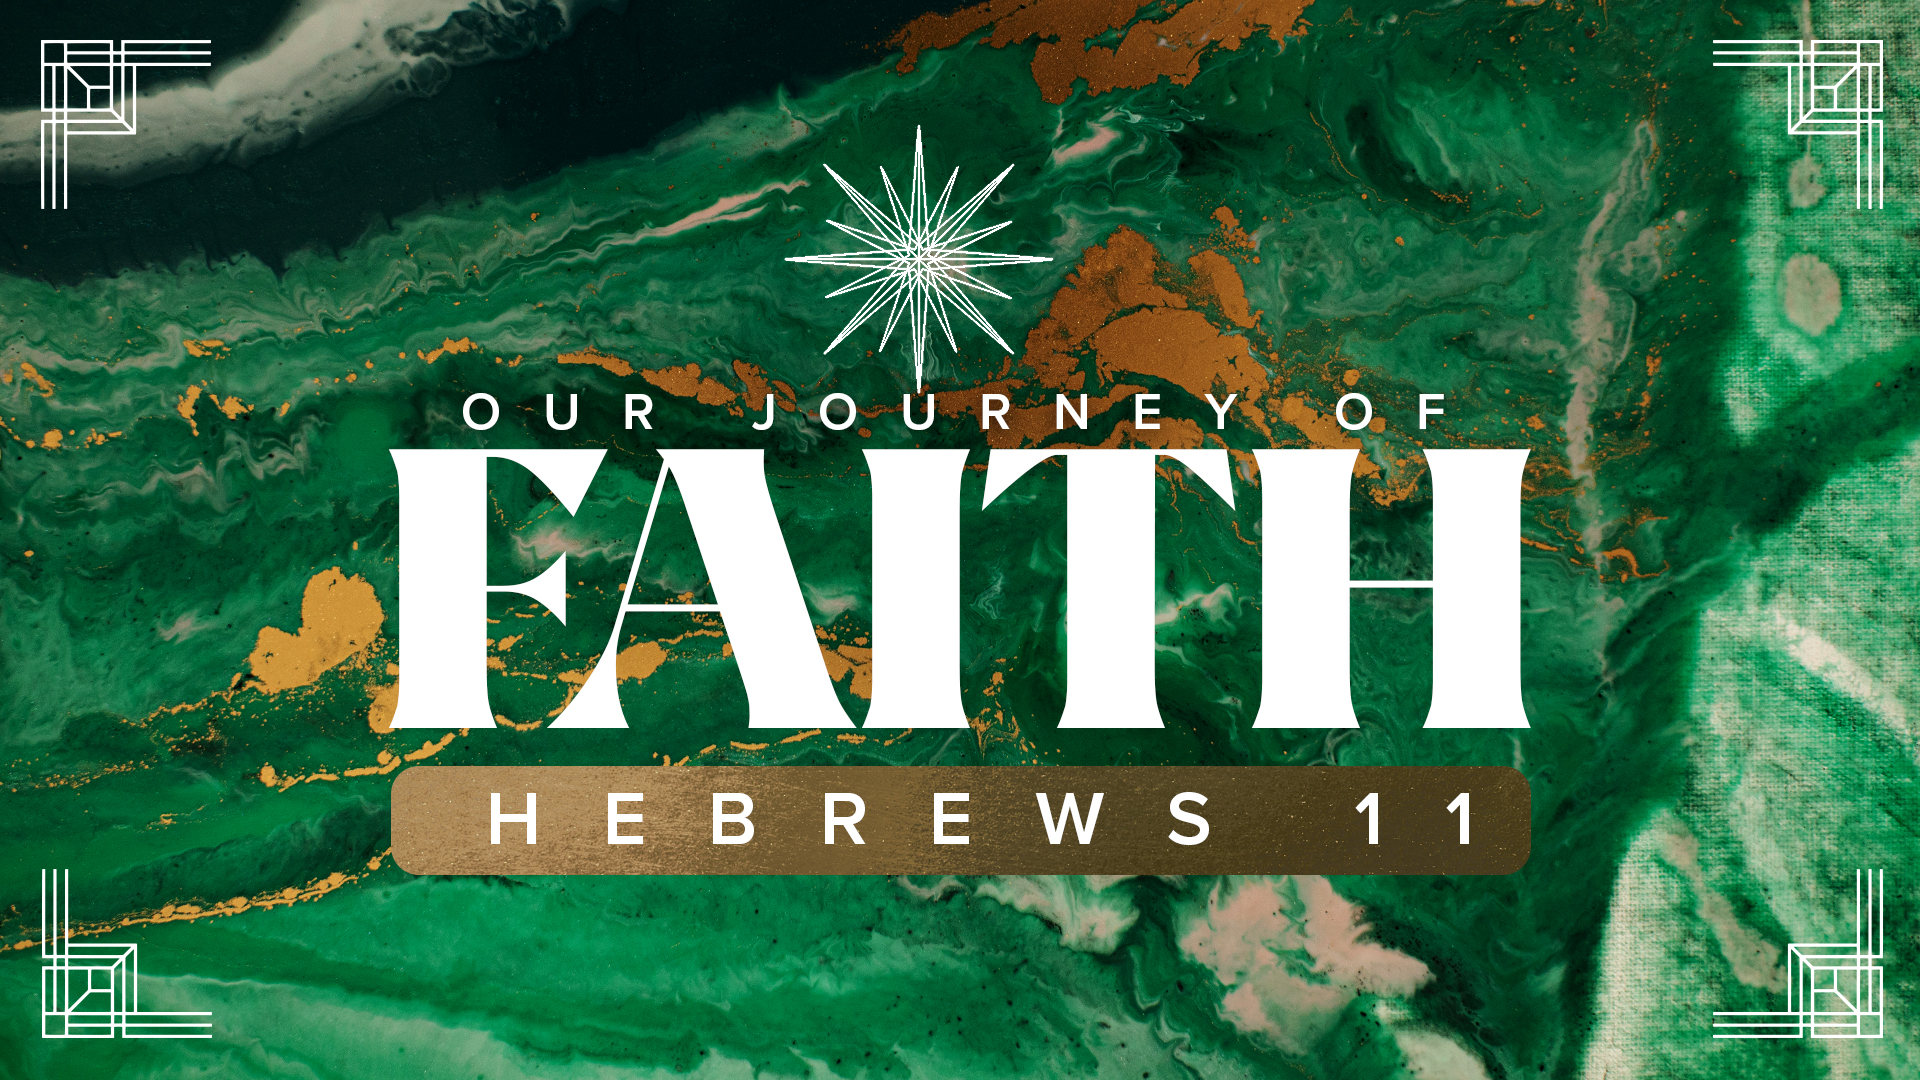 Hebrews 11:13-16 There Is No Place Like Home (Hebrews 11: Our Journey of Faith)